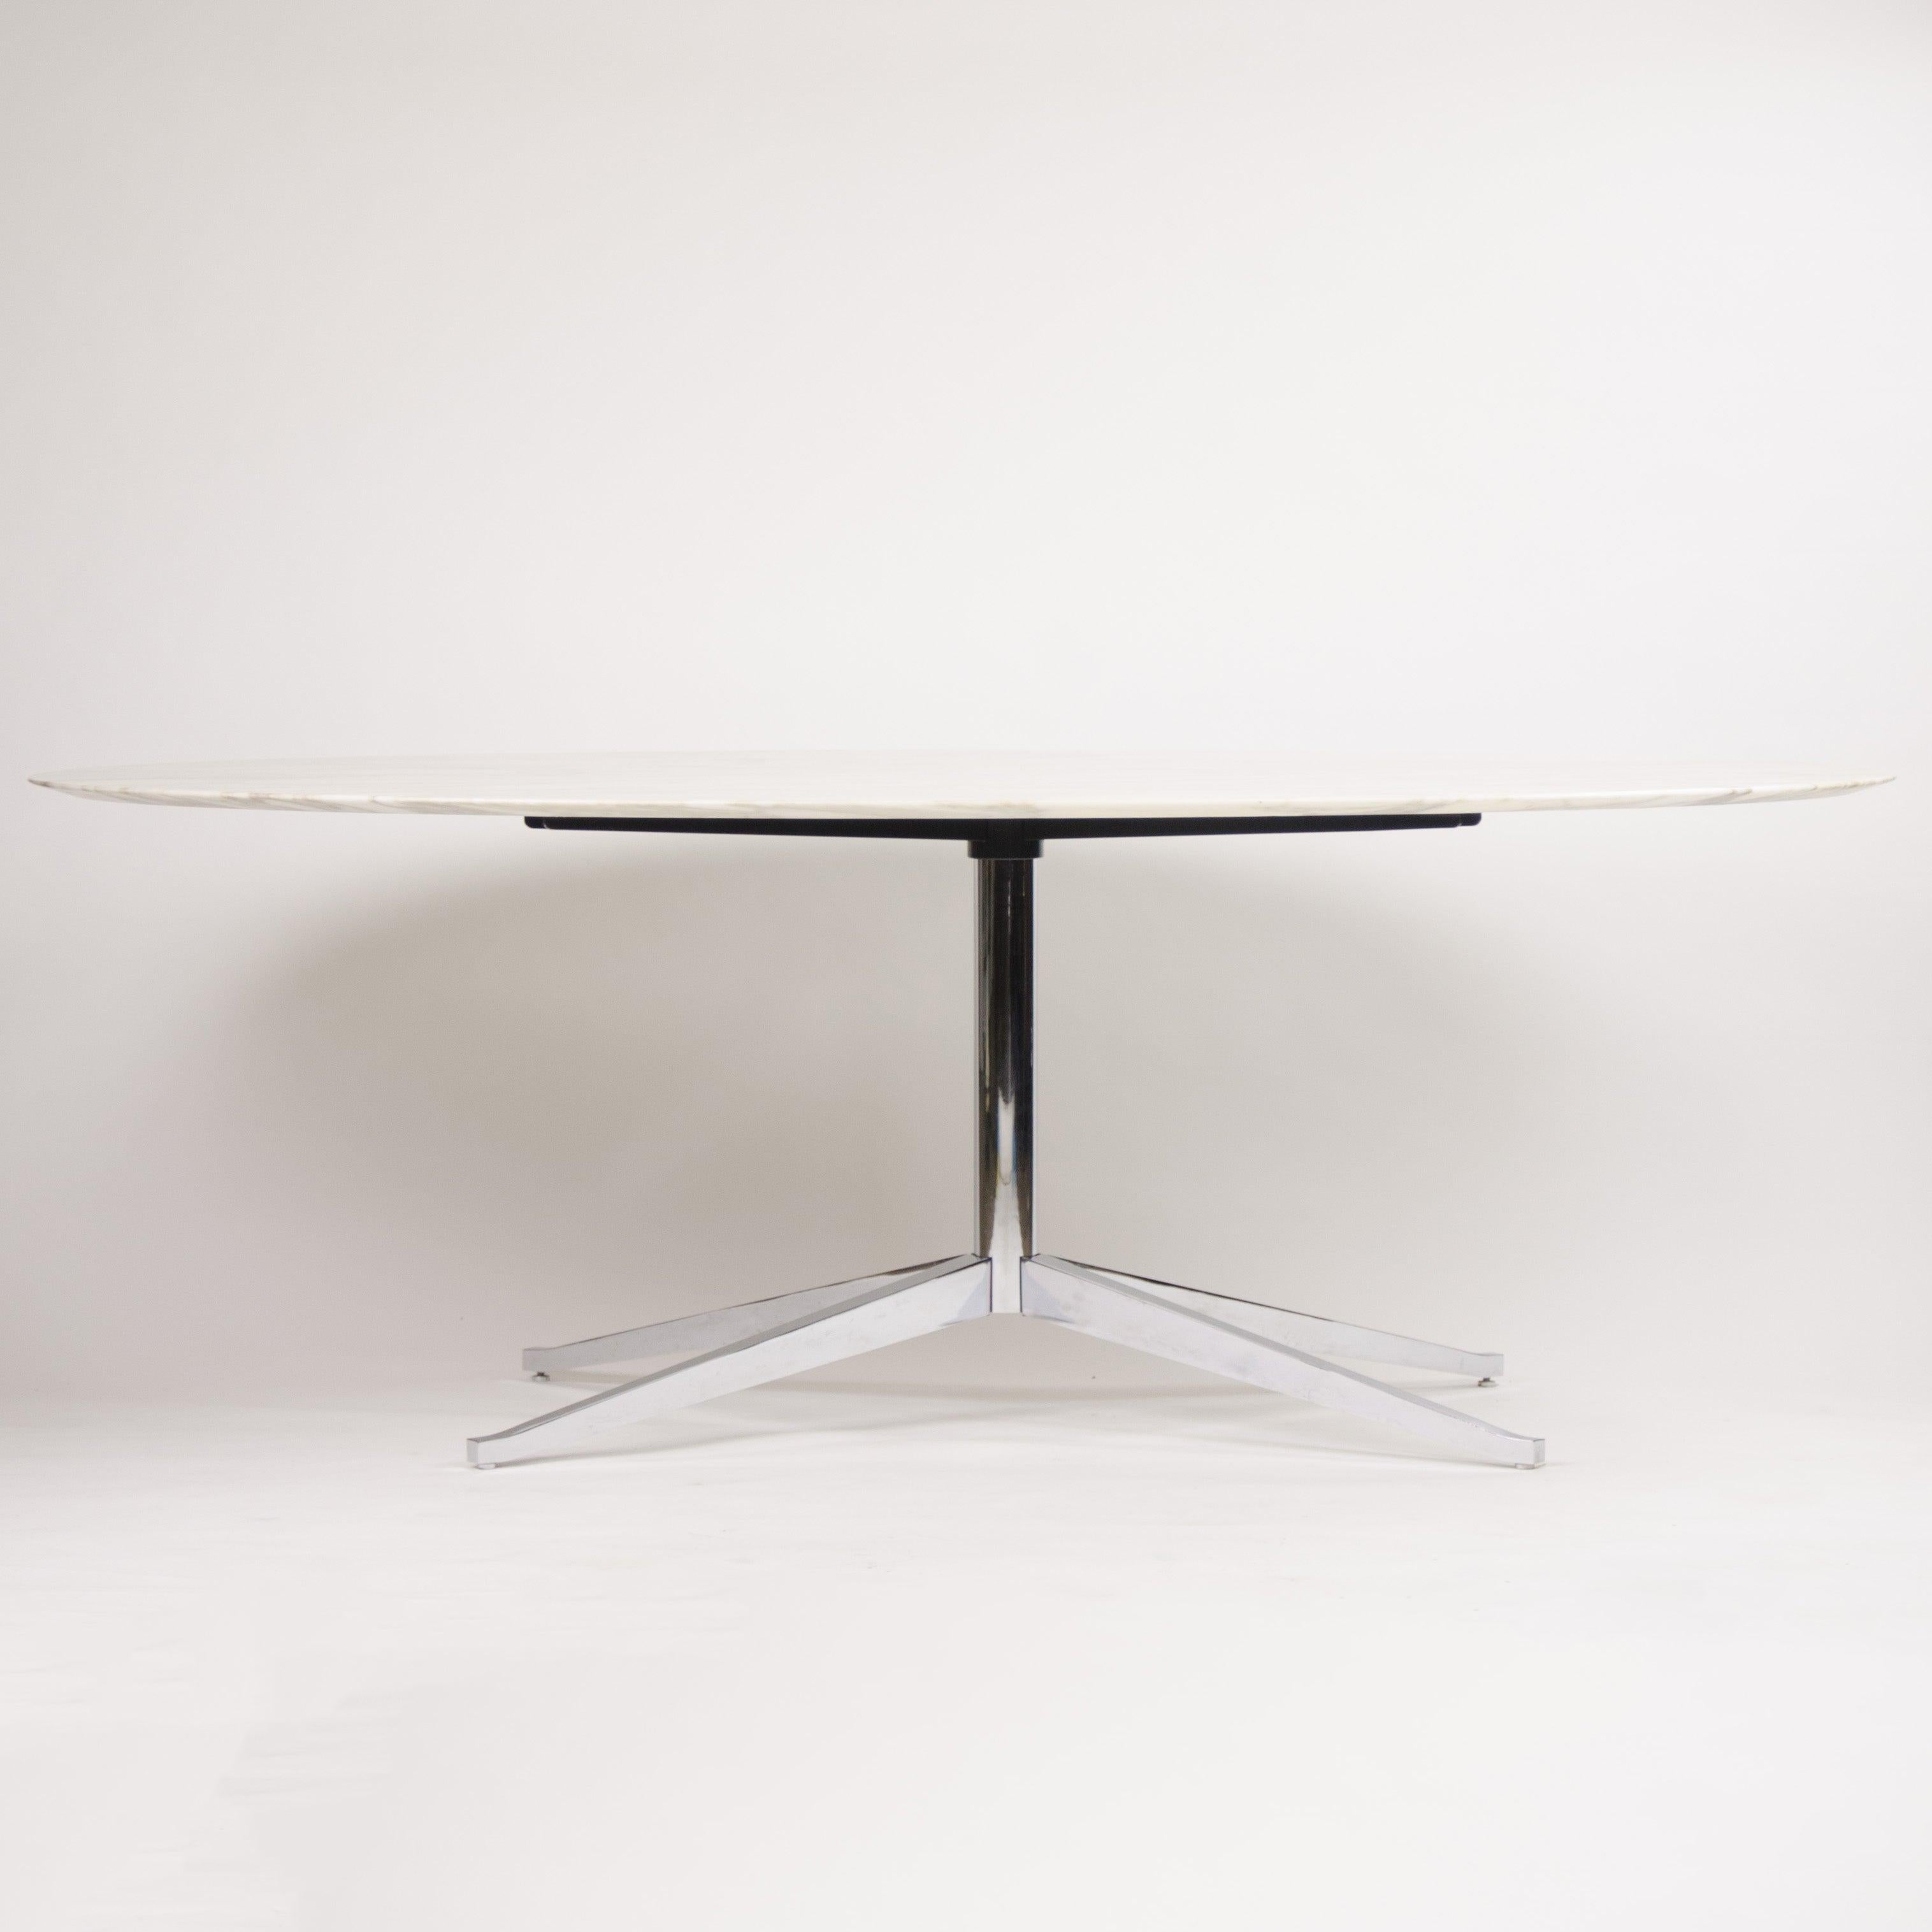 Américain 2007 Florence Knoll 78 in Calacatta Marble Dining Conference Table 2x Available en vente